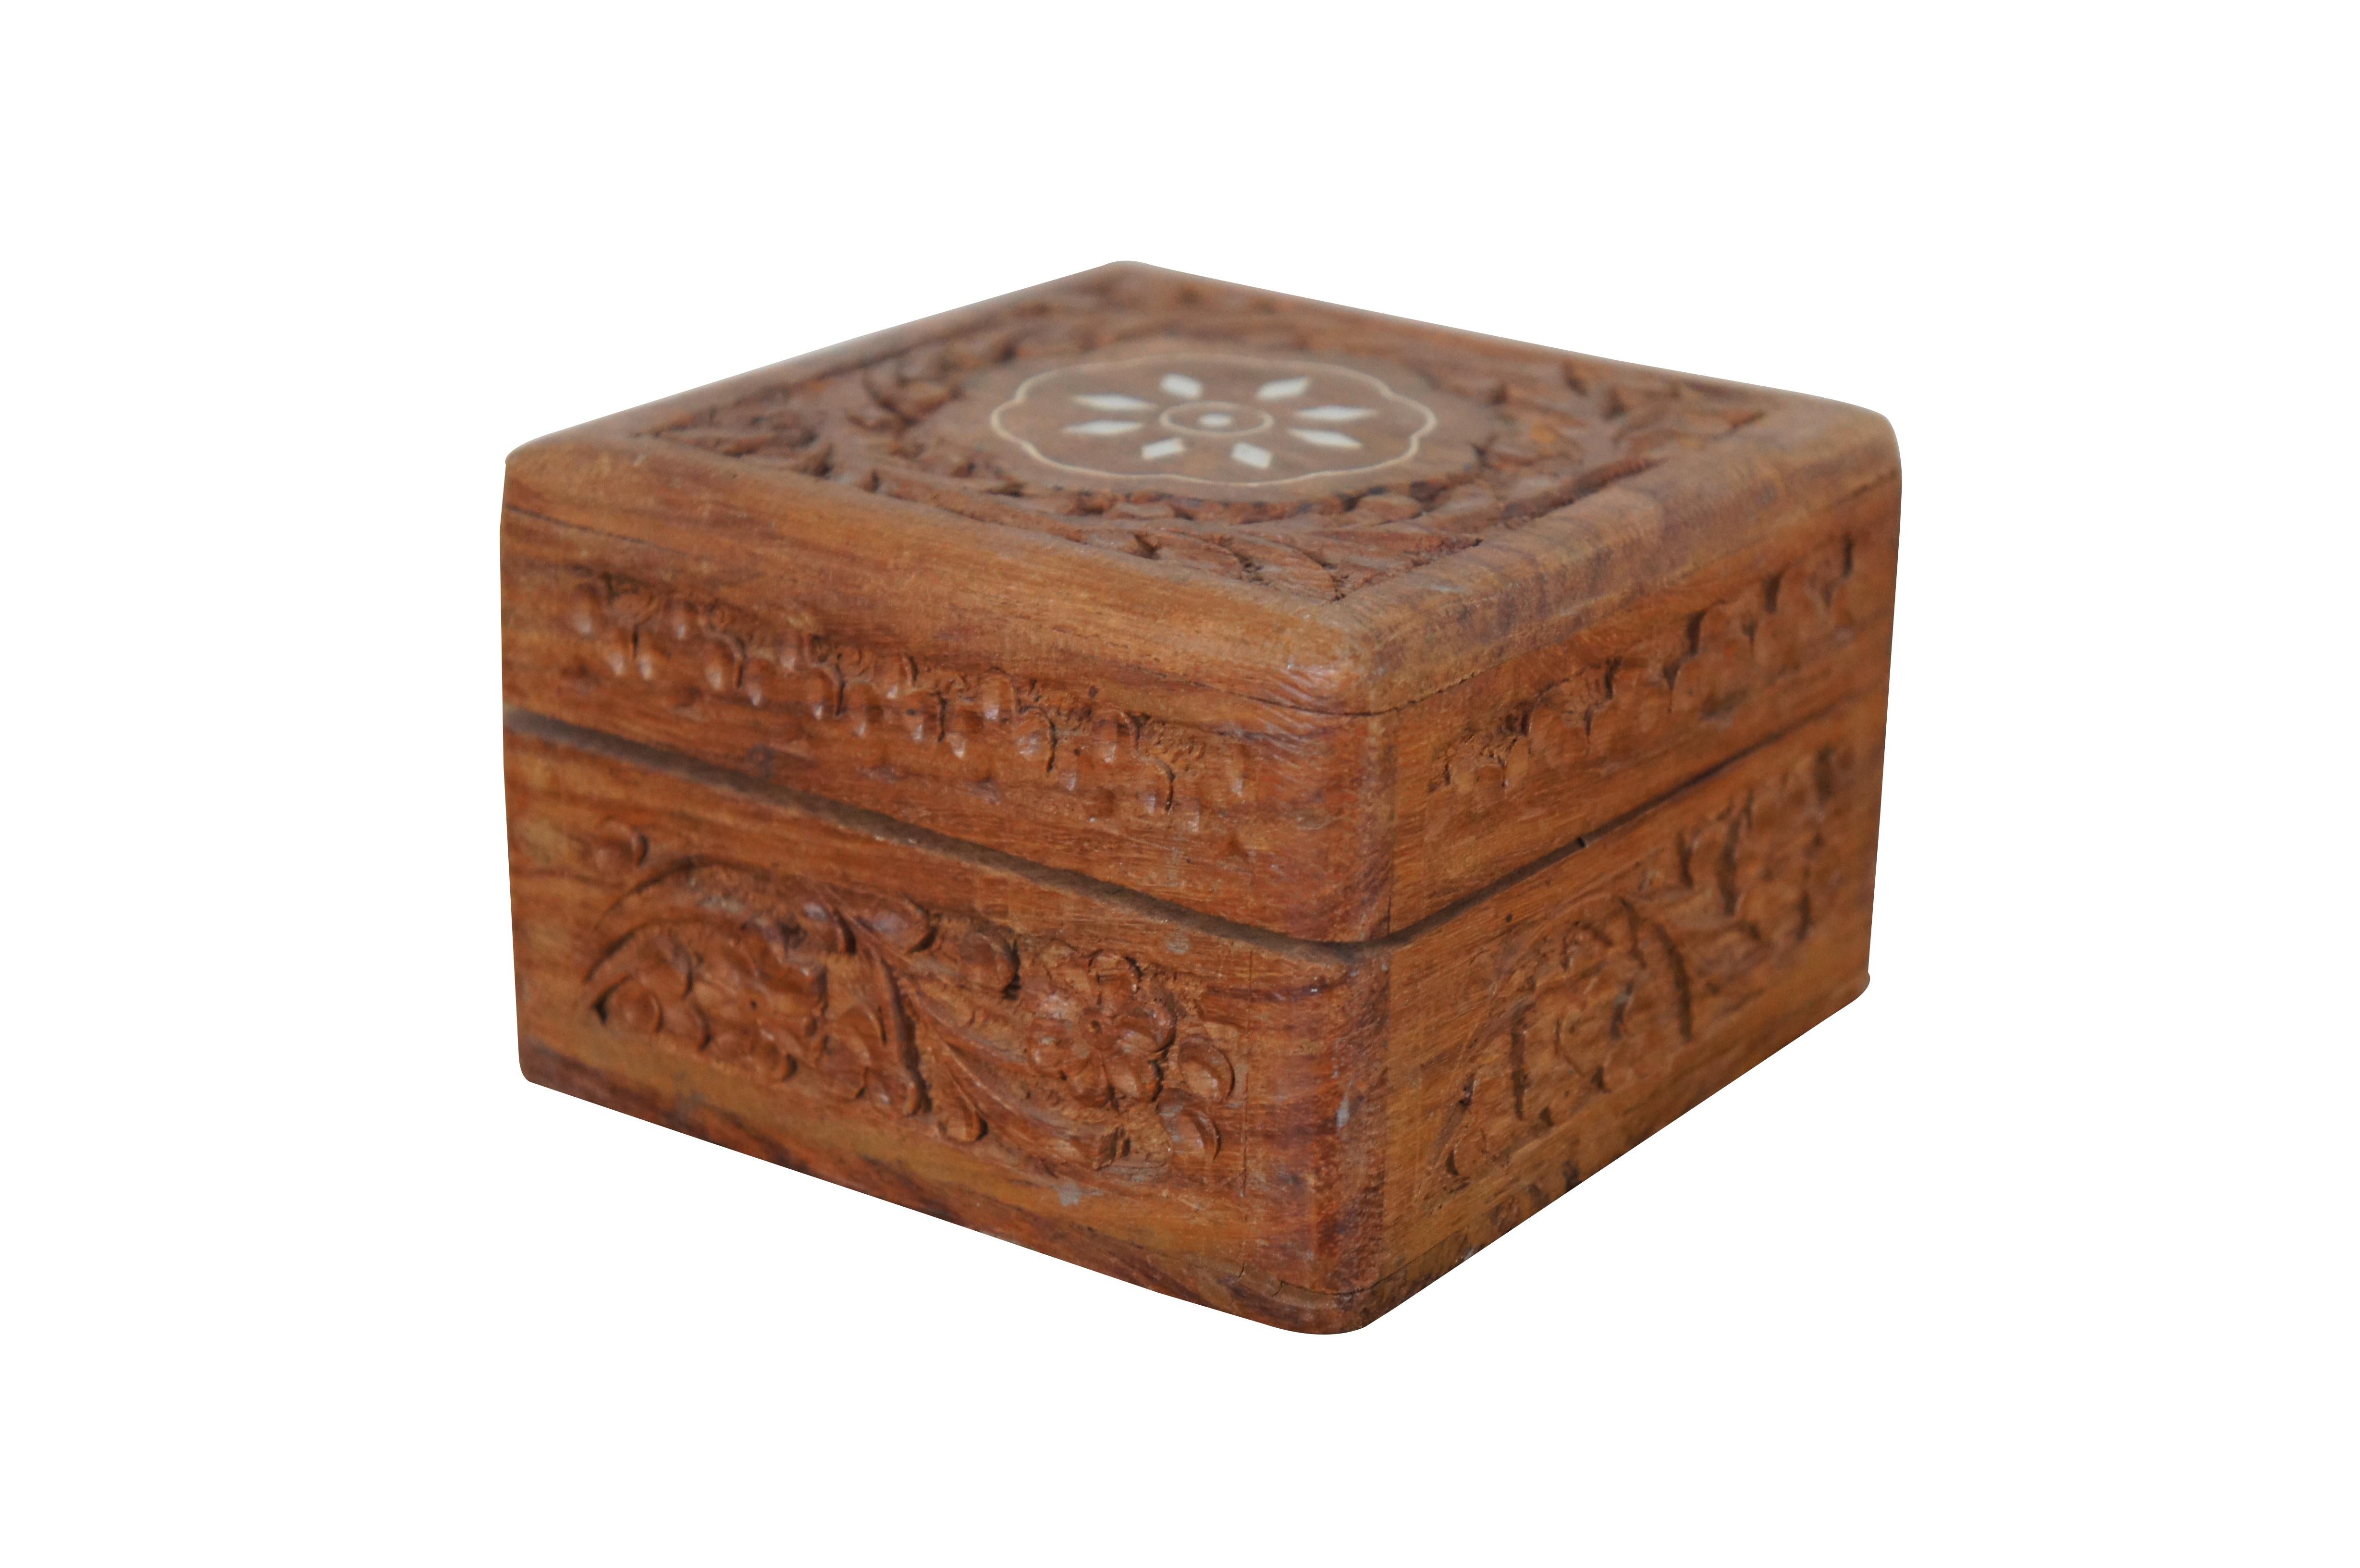 Vintage Sheesham wood / Indian Rosewood hinged jewelry / keepsake / trinket box featuring square form with carved floral and inlaid accents.

Dimensions:
4